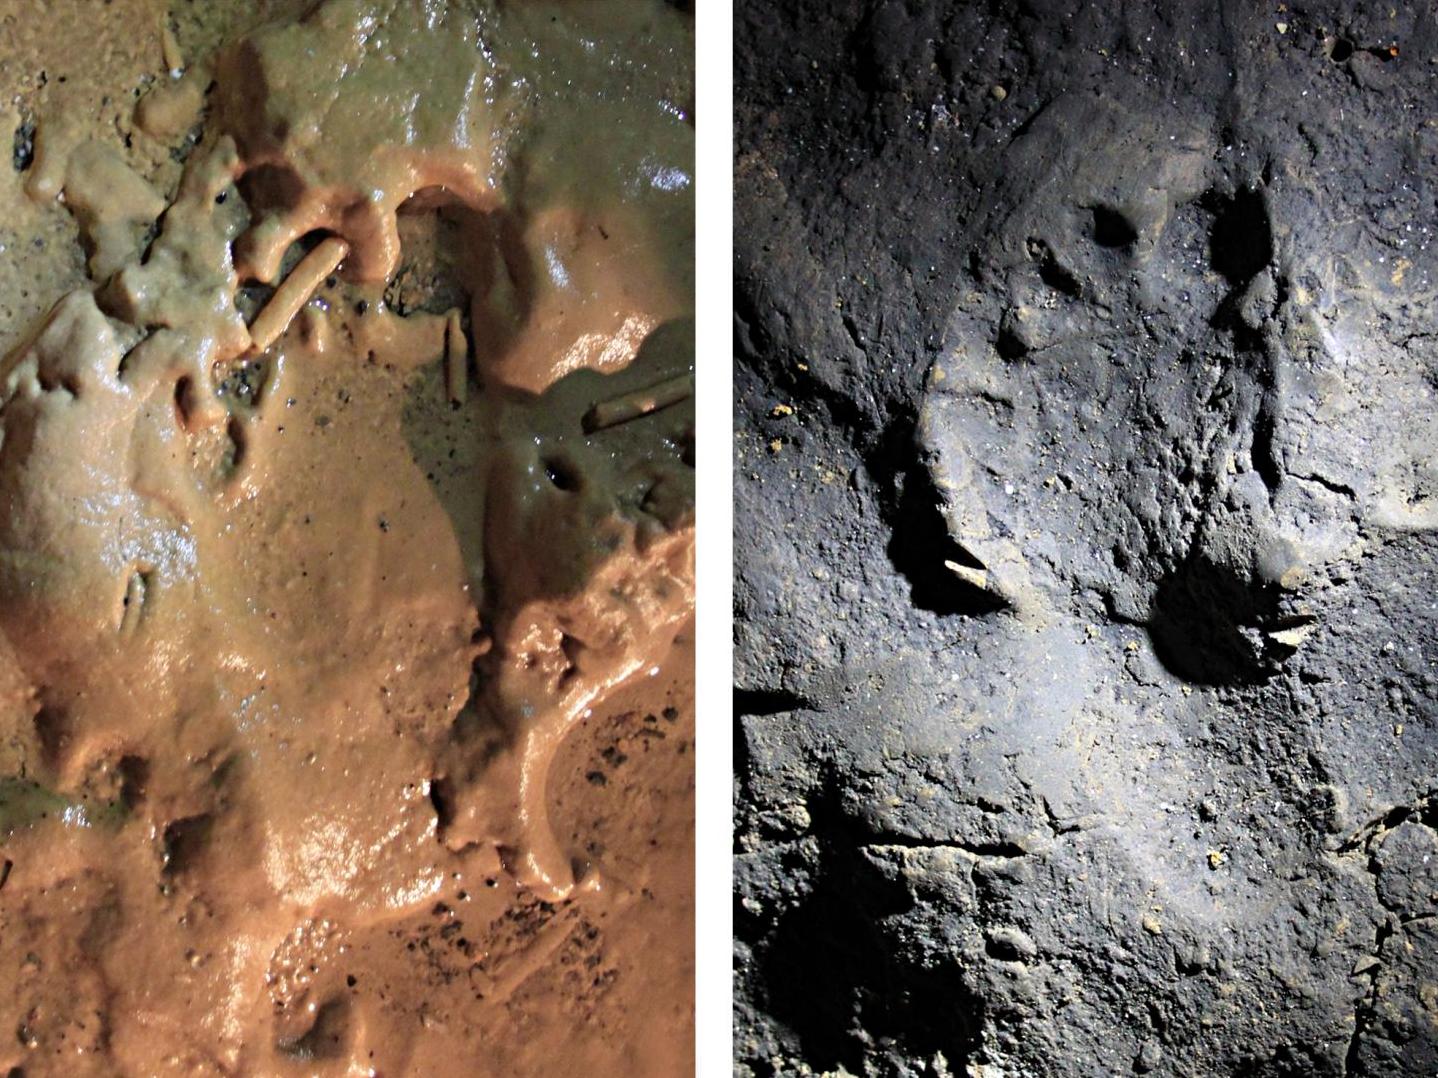 These are ancient human footprints impressed on different surfaces in the cave of Bàsura